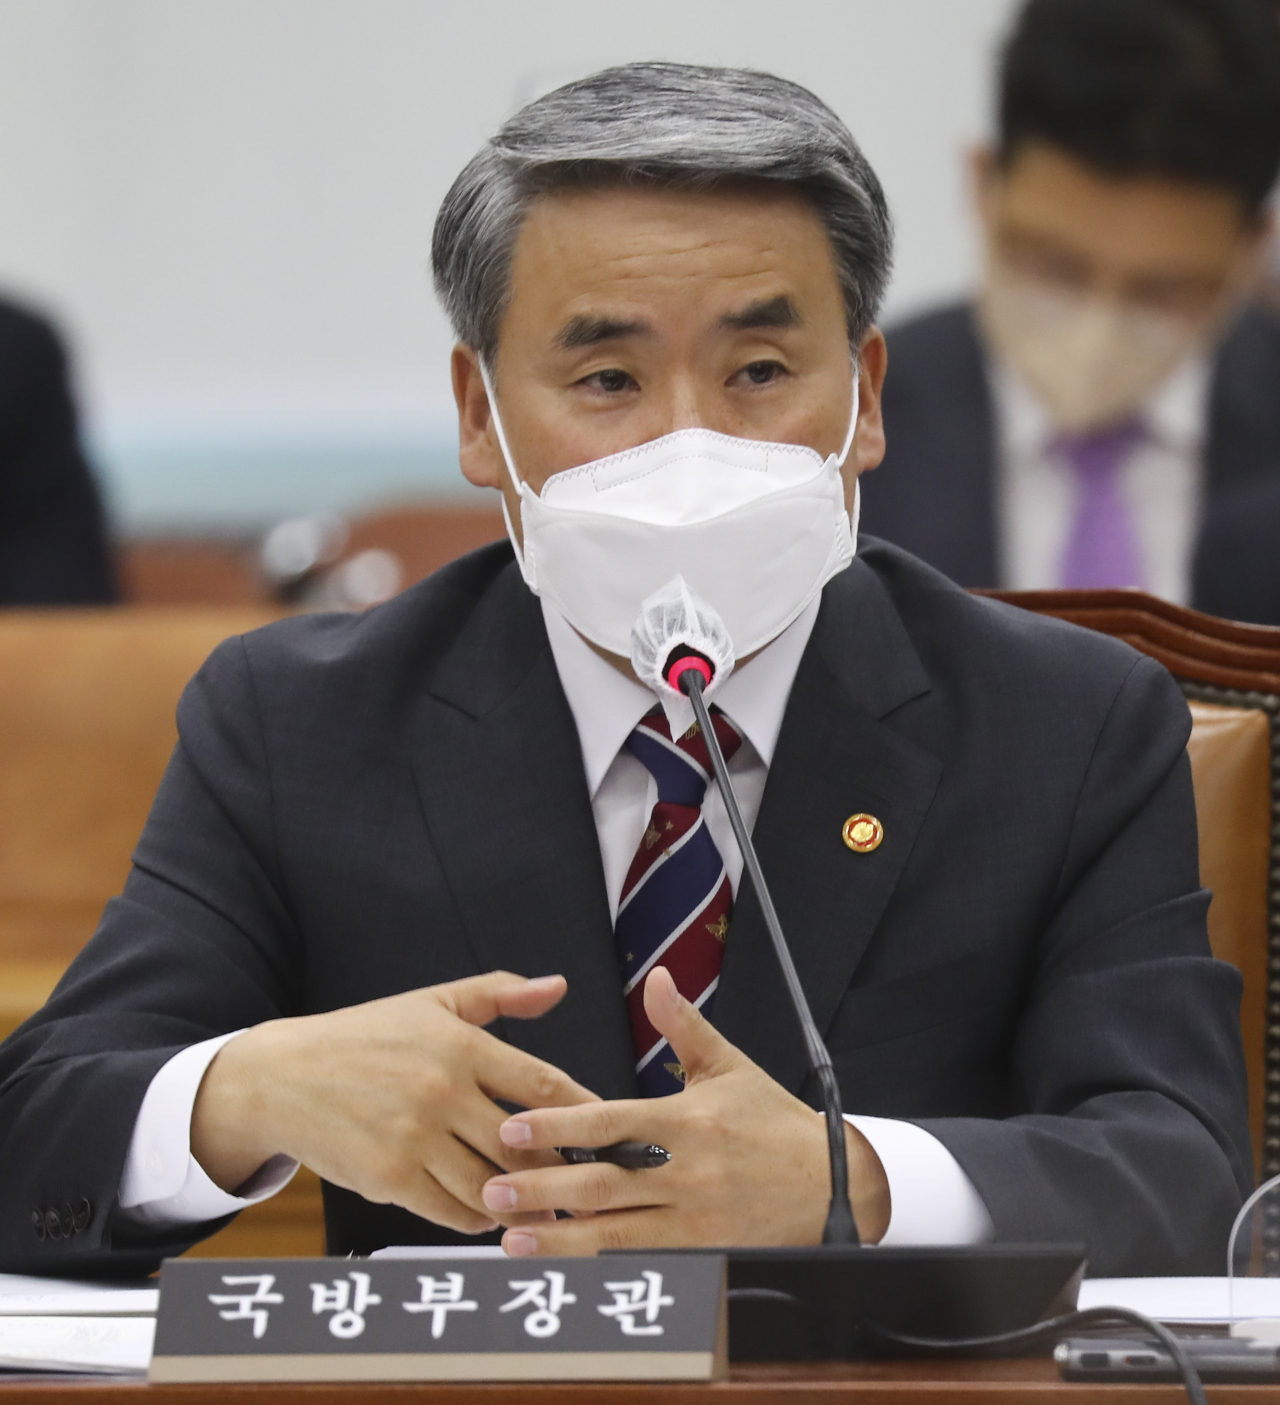 This photo, taken on May 17, 2022, shows Defense Minister Lee Jong-sup speaking during a parliamentary session at the National Assembly in Seoul. (Yonhap)